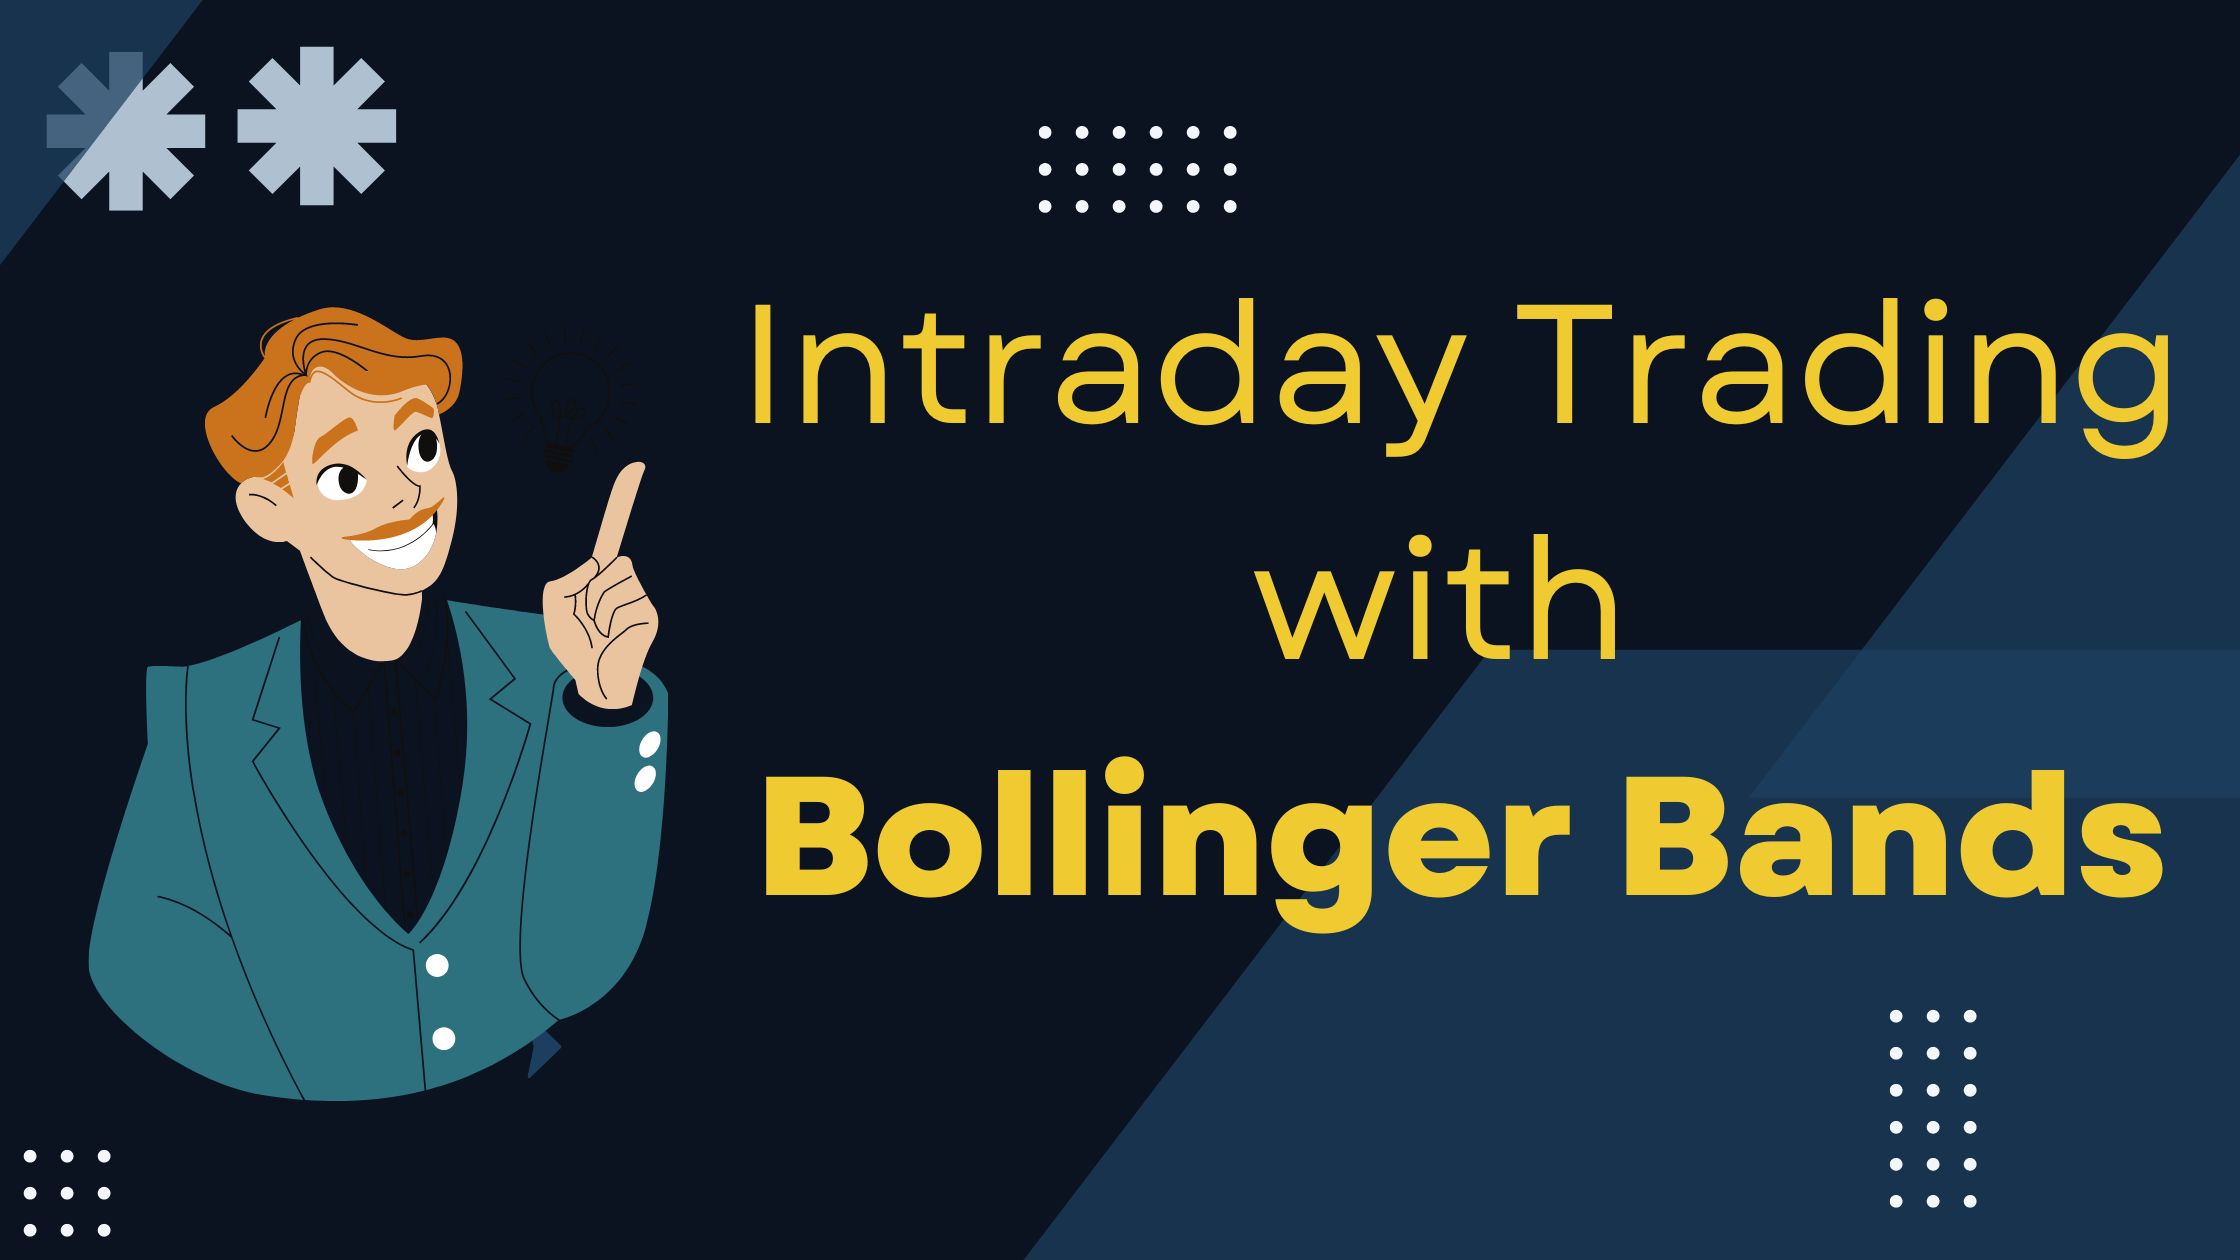 Intraday Trading with Bollinger Bands